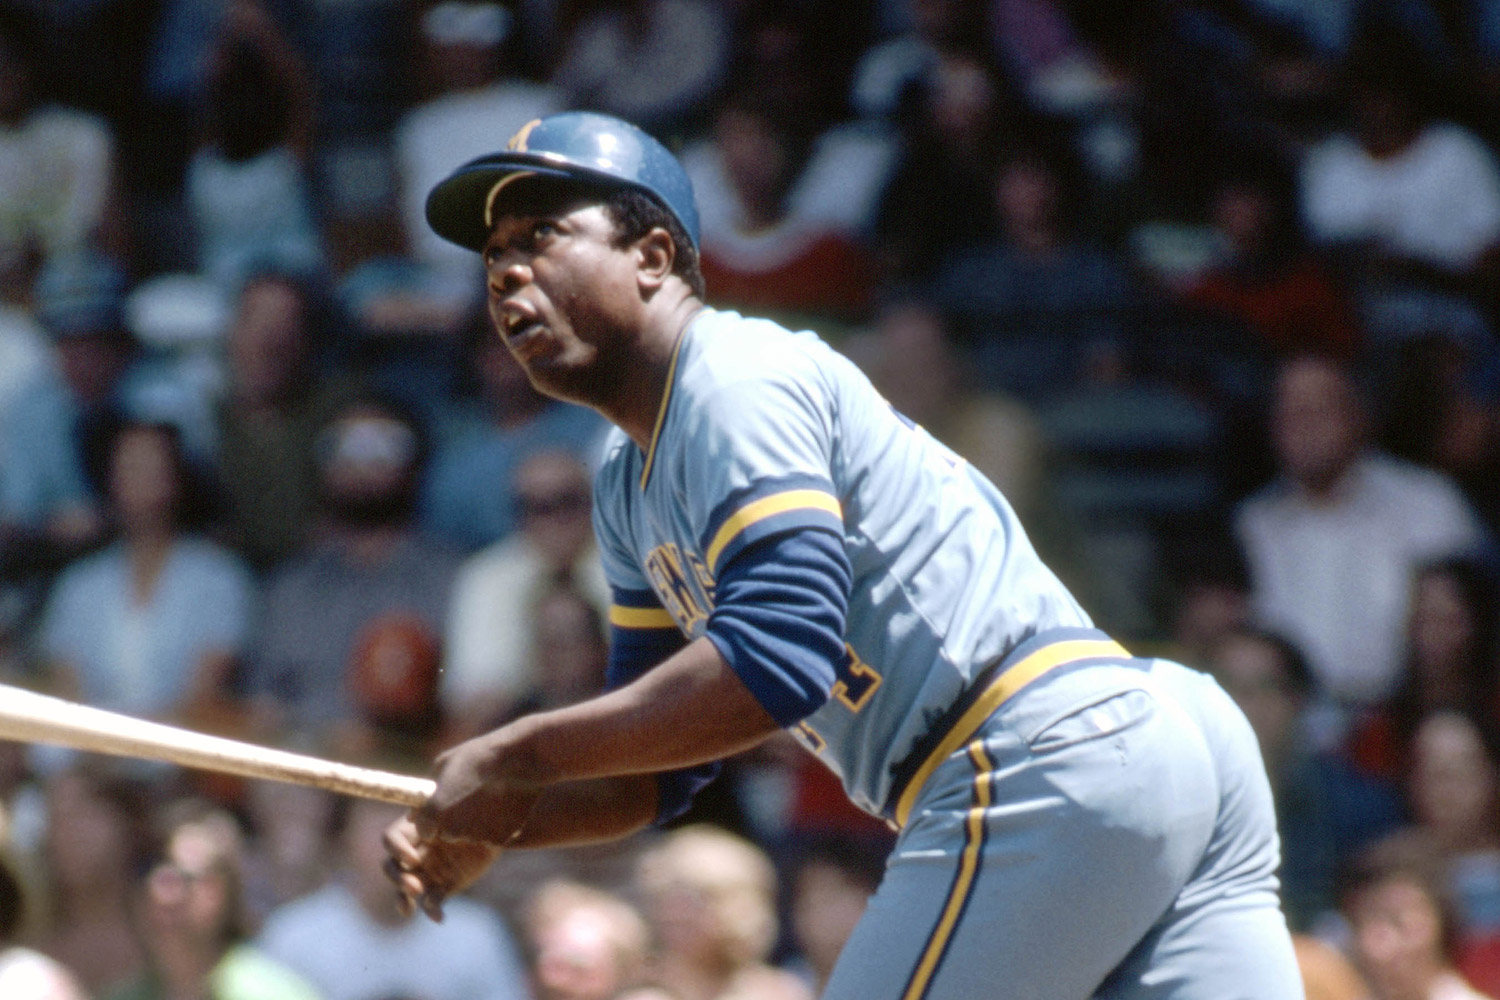 Brewers: All-Time Best Players To Wear Jersey Nos. 11-15